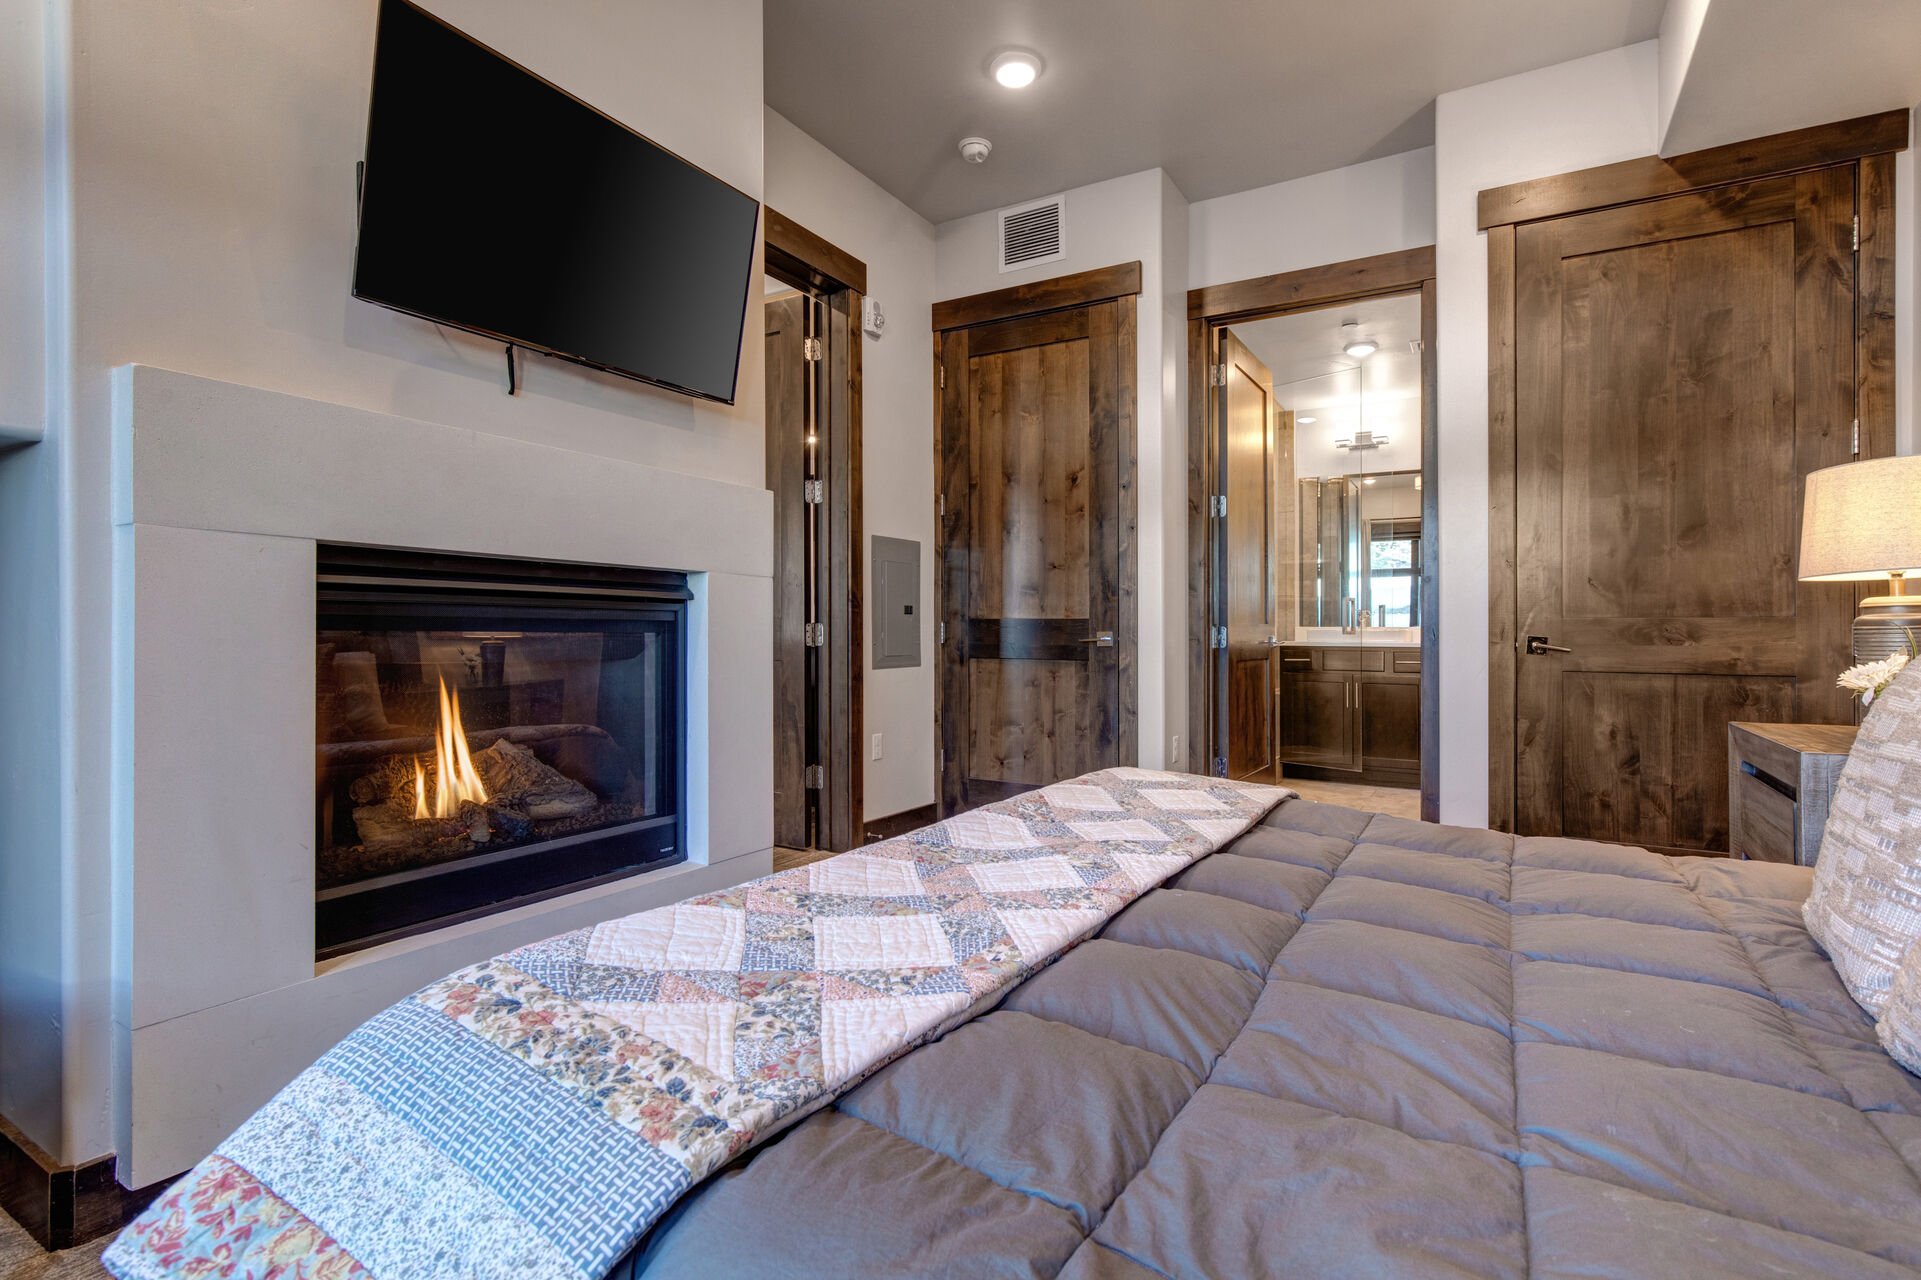 Master bedroom with king bed, smart TV, gas fireplace, and ensuite bathroom